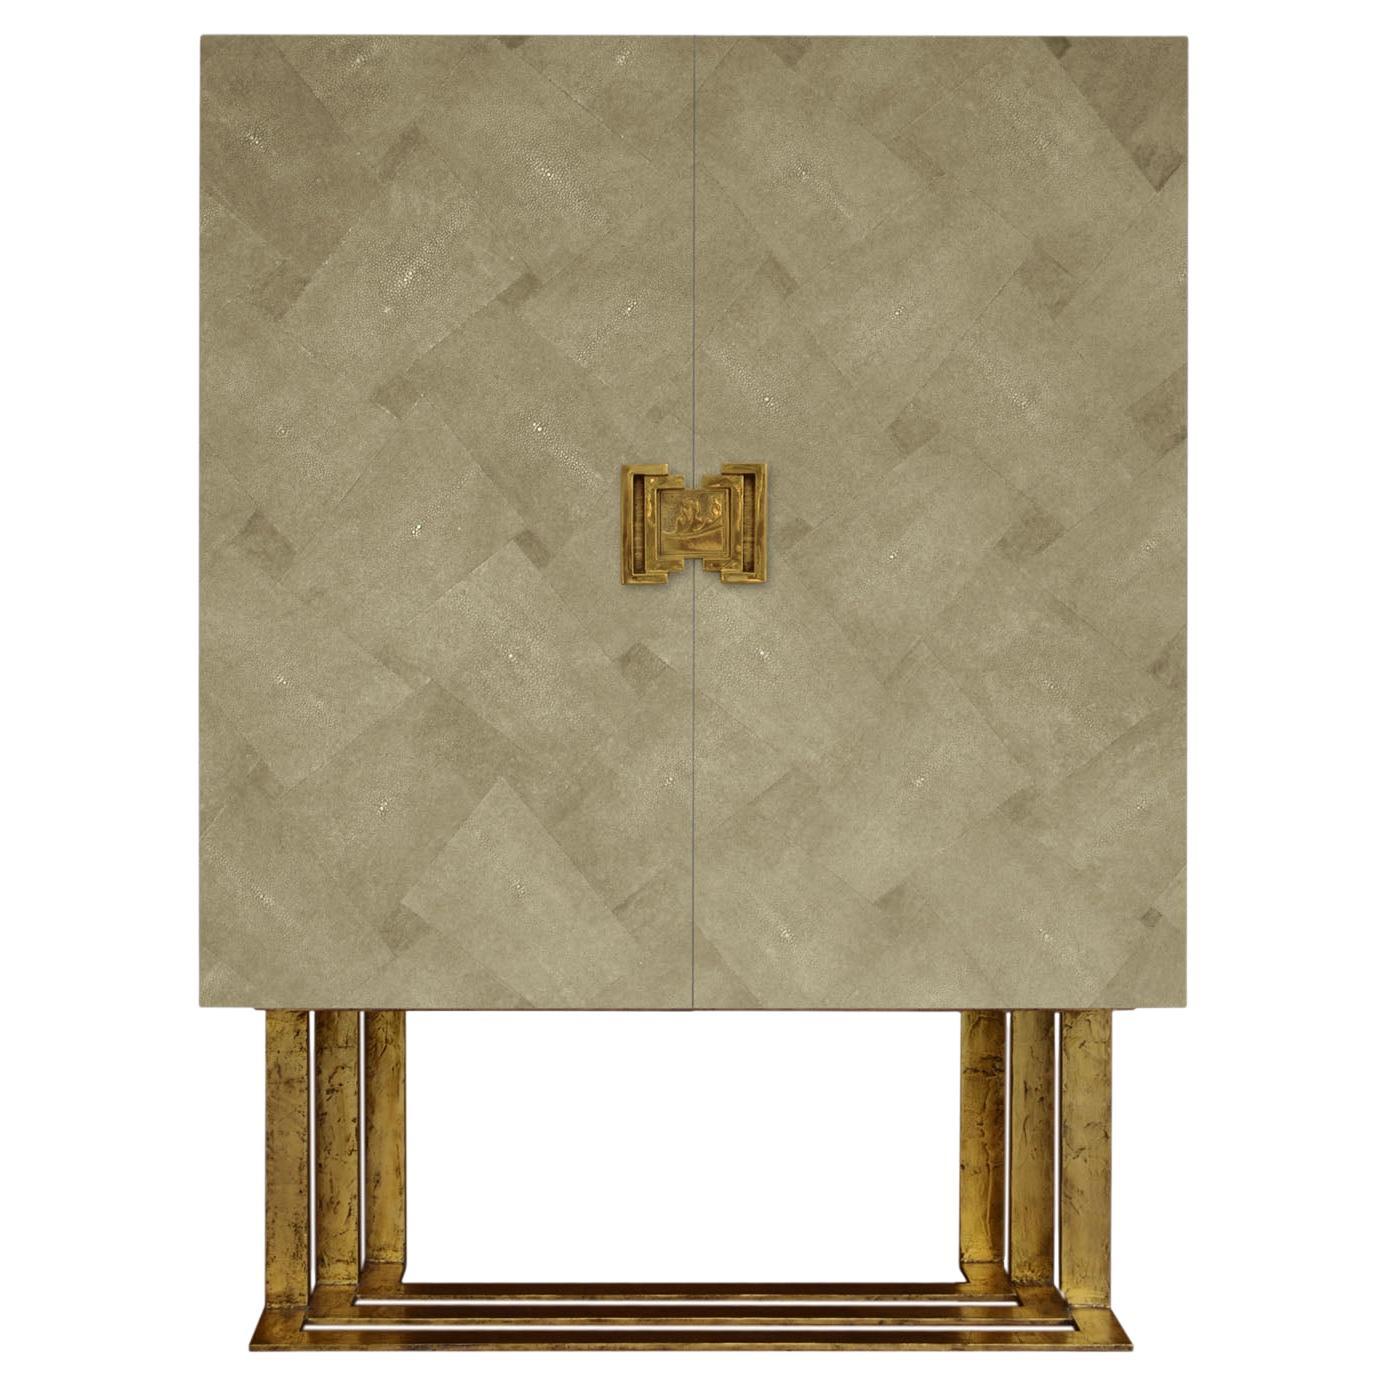 Cabinet art deco maple wood and scagliola shagreen casted brass handle and legs